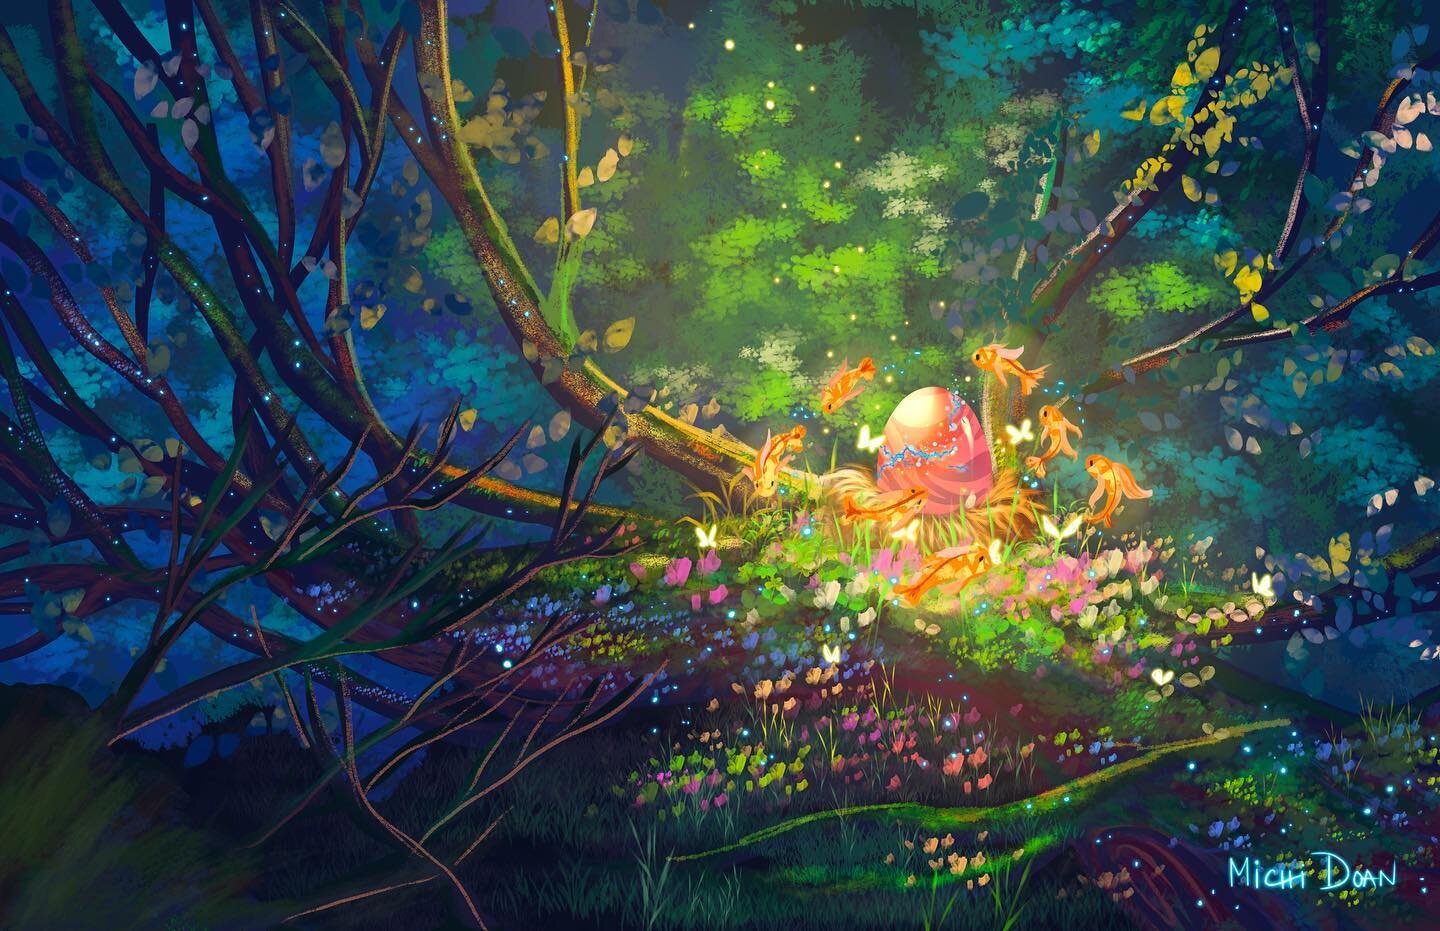 Illustration 31, Dragon's Egg.
Deep in the forest, there's a magical egg surrounds by seven goldfish. The egg begins to hatch, who or what will be born into this earth? 
.
.
I was having way too much fun painting this forest using @devinellekurtz's b